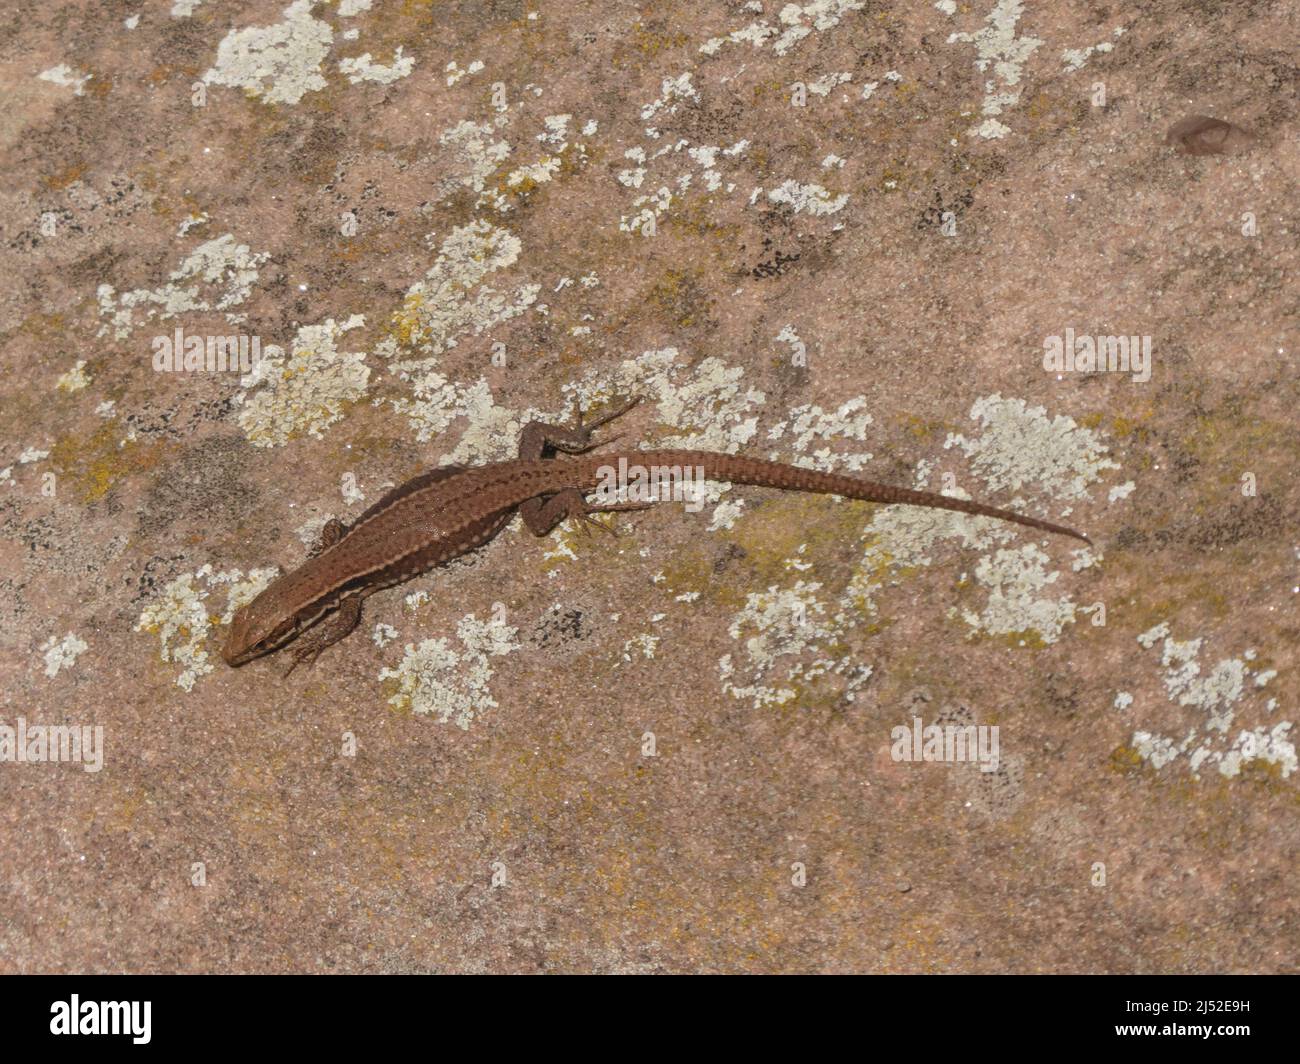 Brown lizard on red sandstone Stock Photo